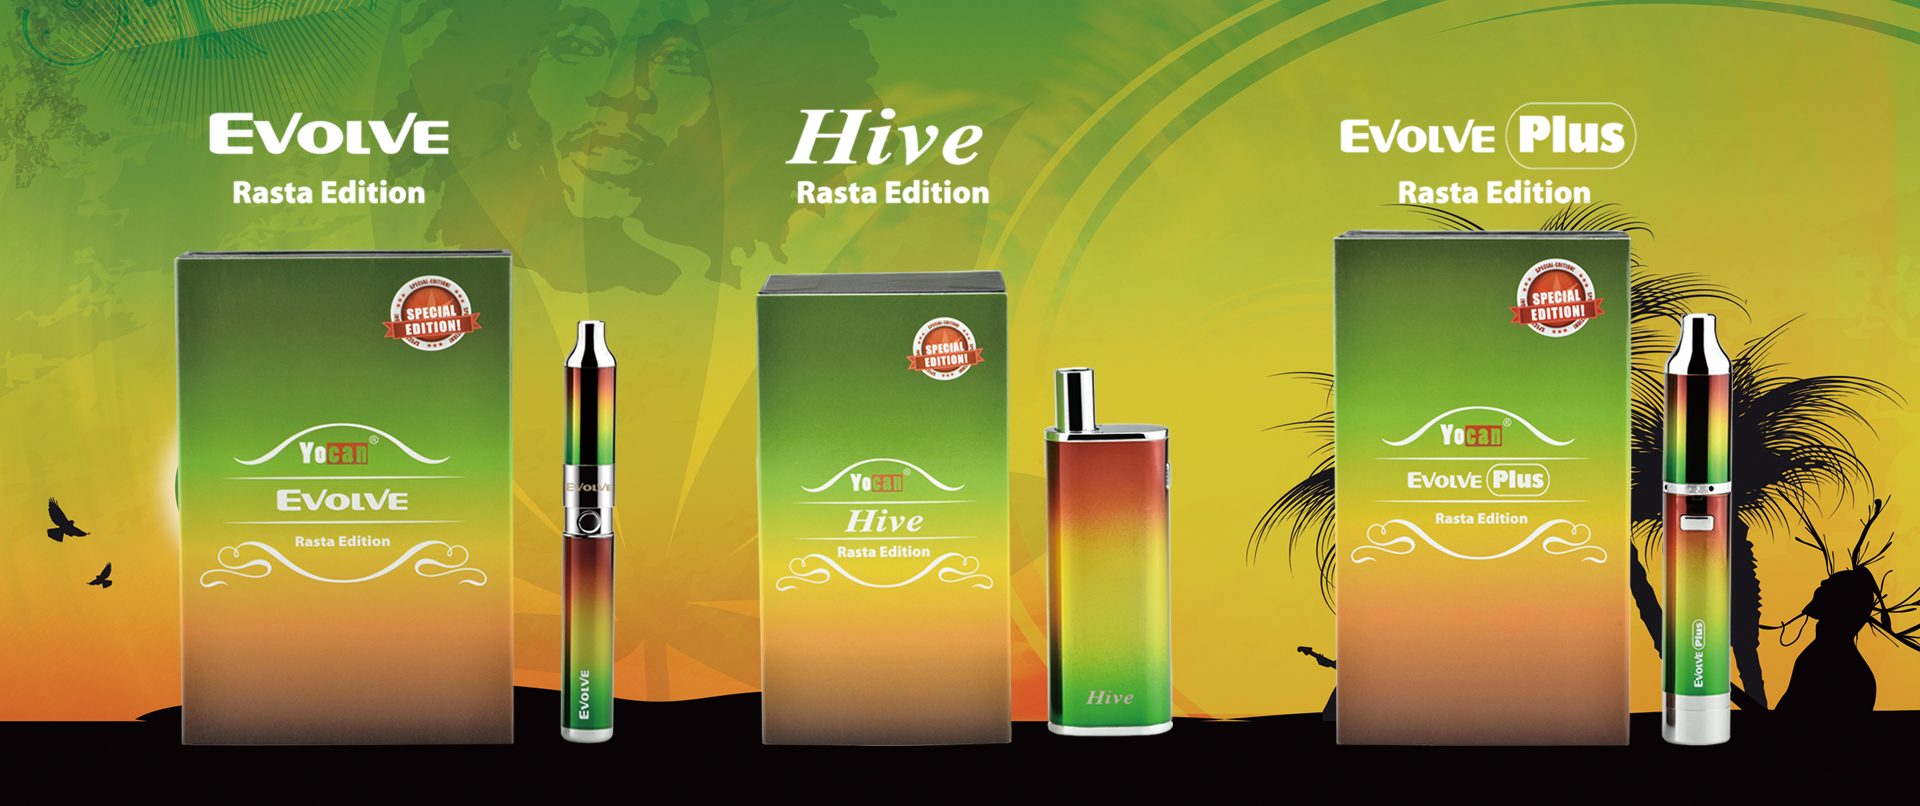 The Yocan Evolve Plus Rasta Edition is a new special edition version of the crowd favorite Evolve Plus.